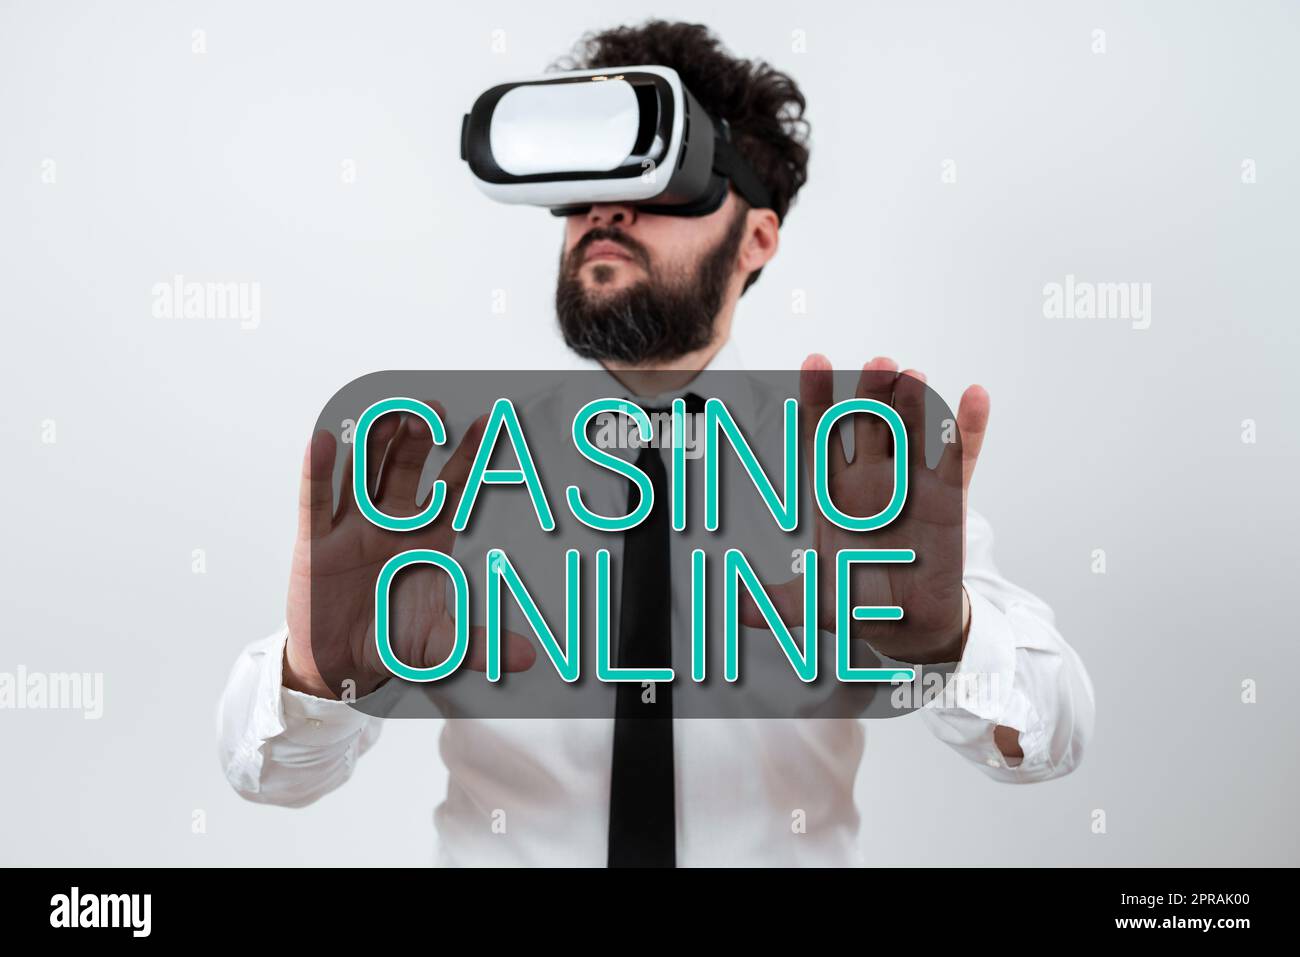 sign-displaying-casino-online-concept-meaning-computer-poker-game-gamble-royal-bet-lotto-high-stakes-man-wearing-vr-glasses-and-presenting-important-messages-between-hands-2PRAK00.jpg